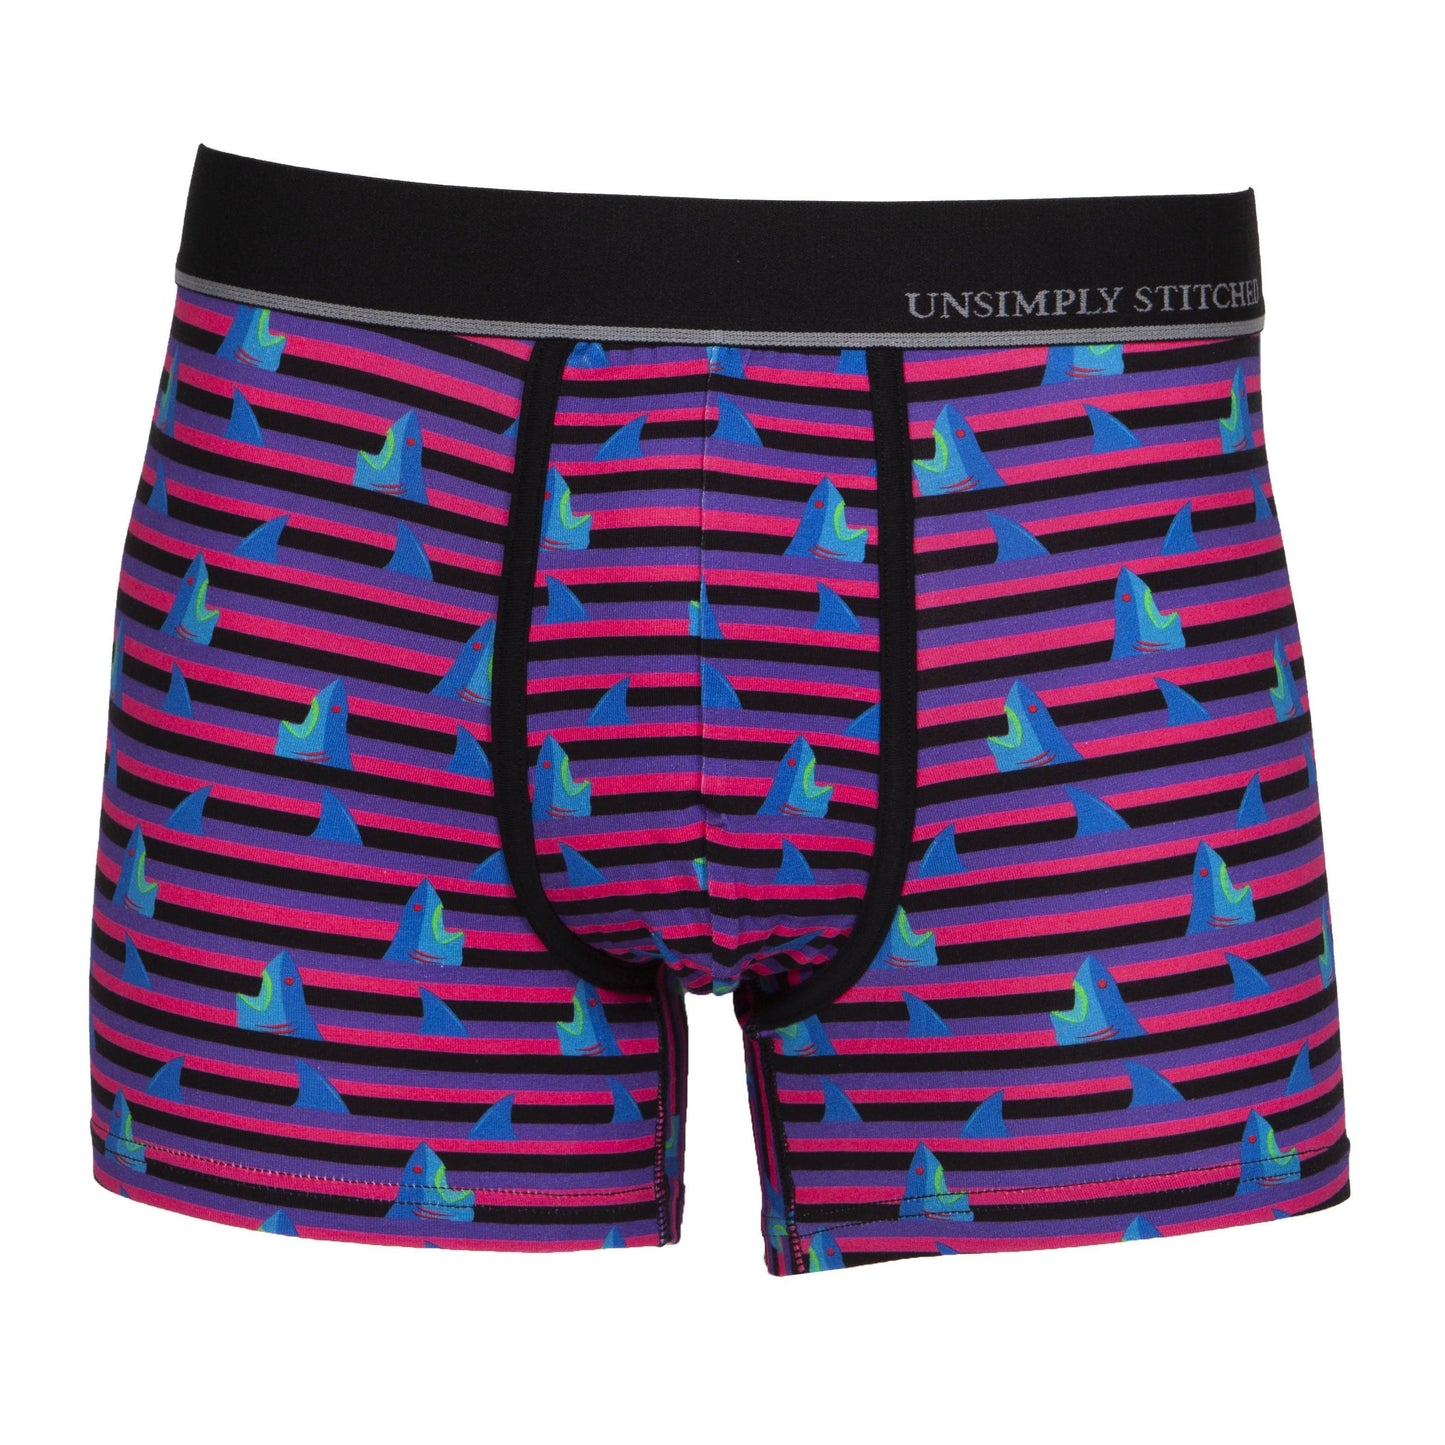 Unsimply Stitched Pink Shark Attack Trunk